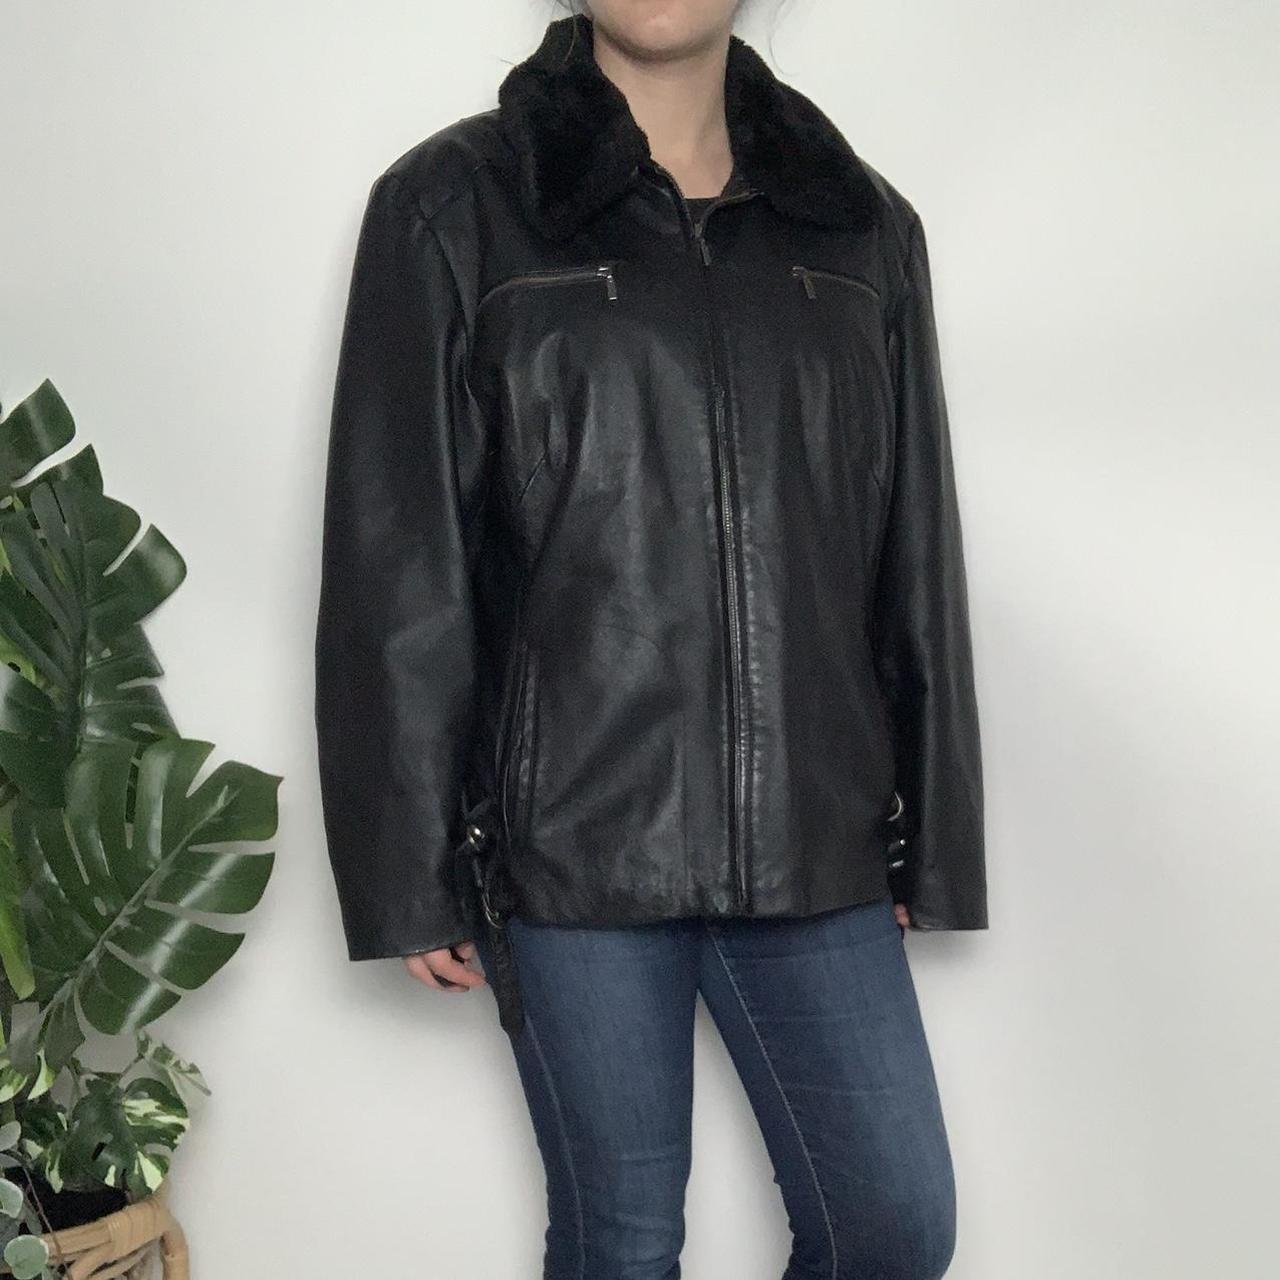 Vintage 90s genuine leather motorcycle jacket with removable collar